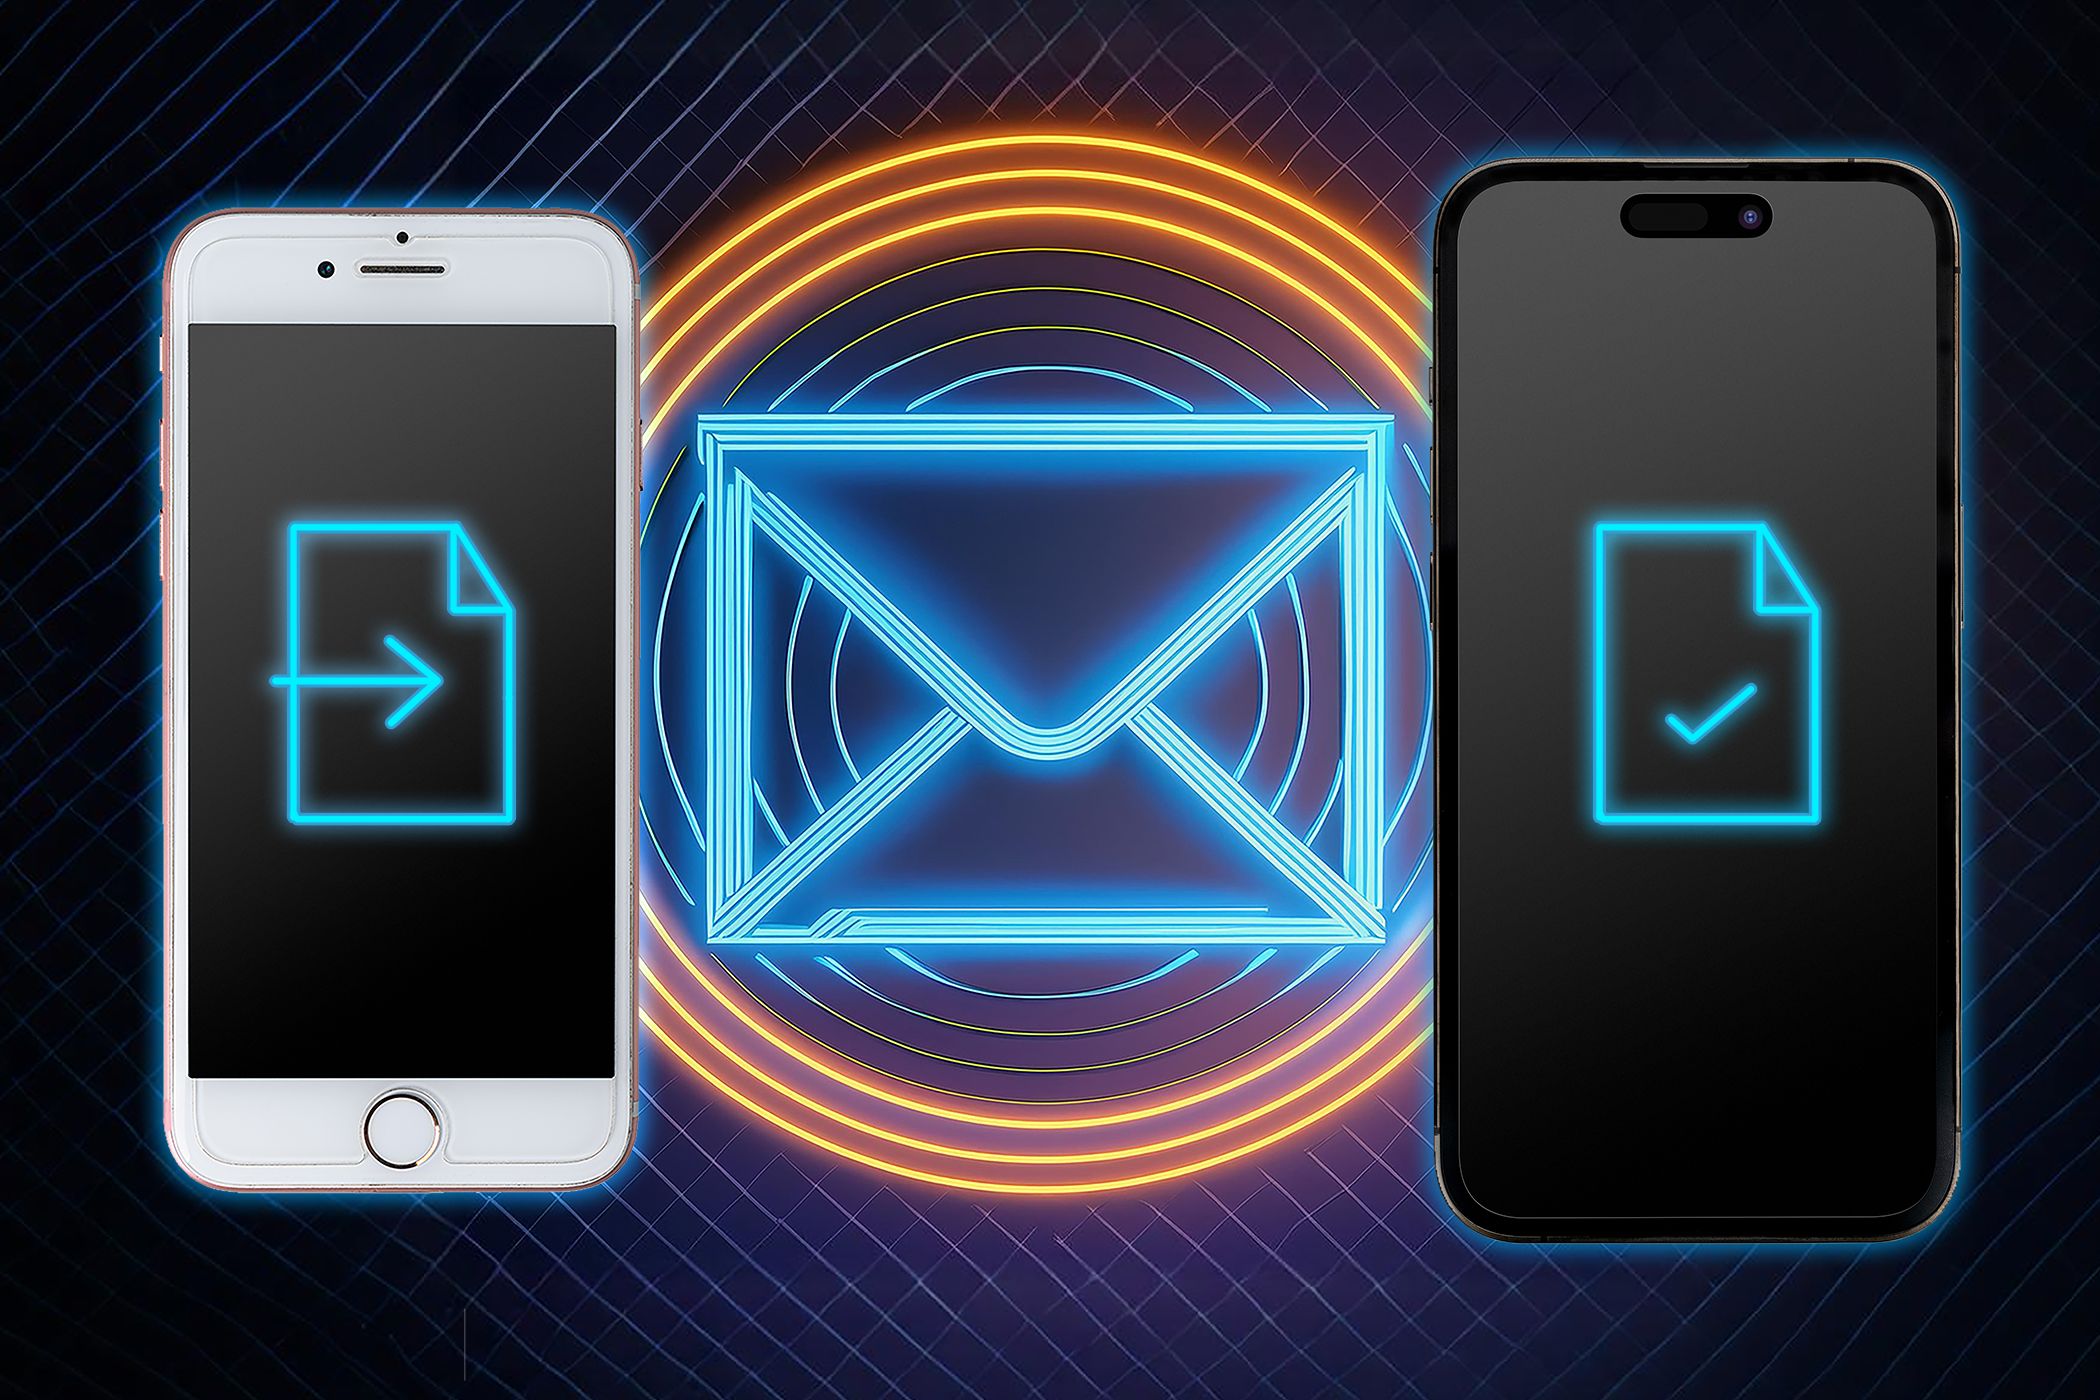 Two iPhones with a bright neon envelope icon in between